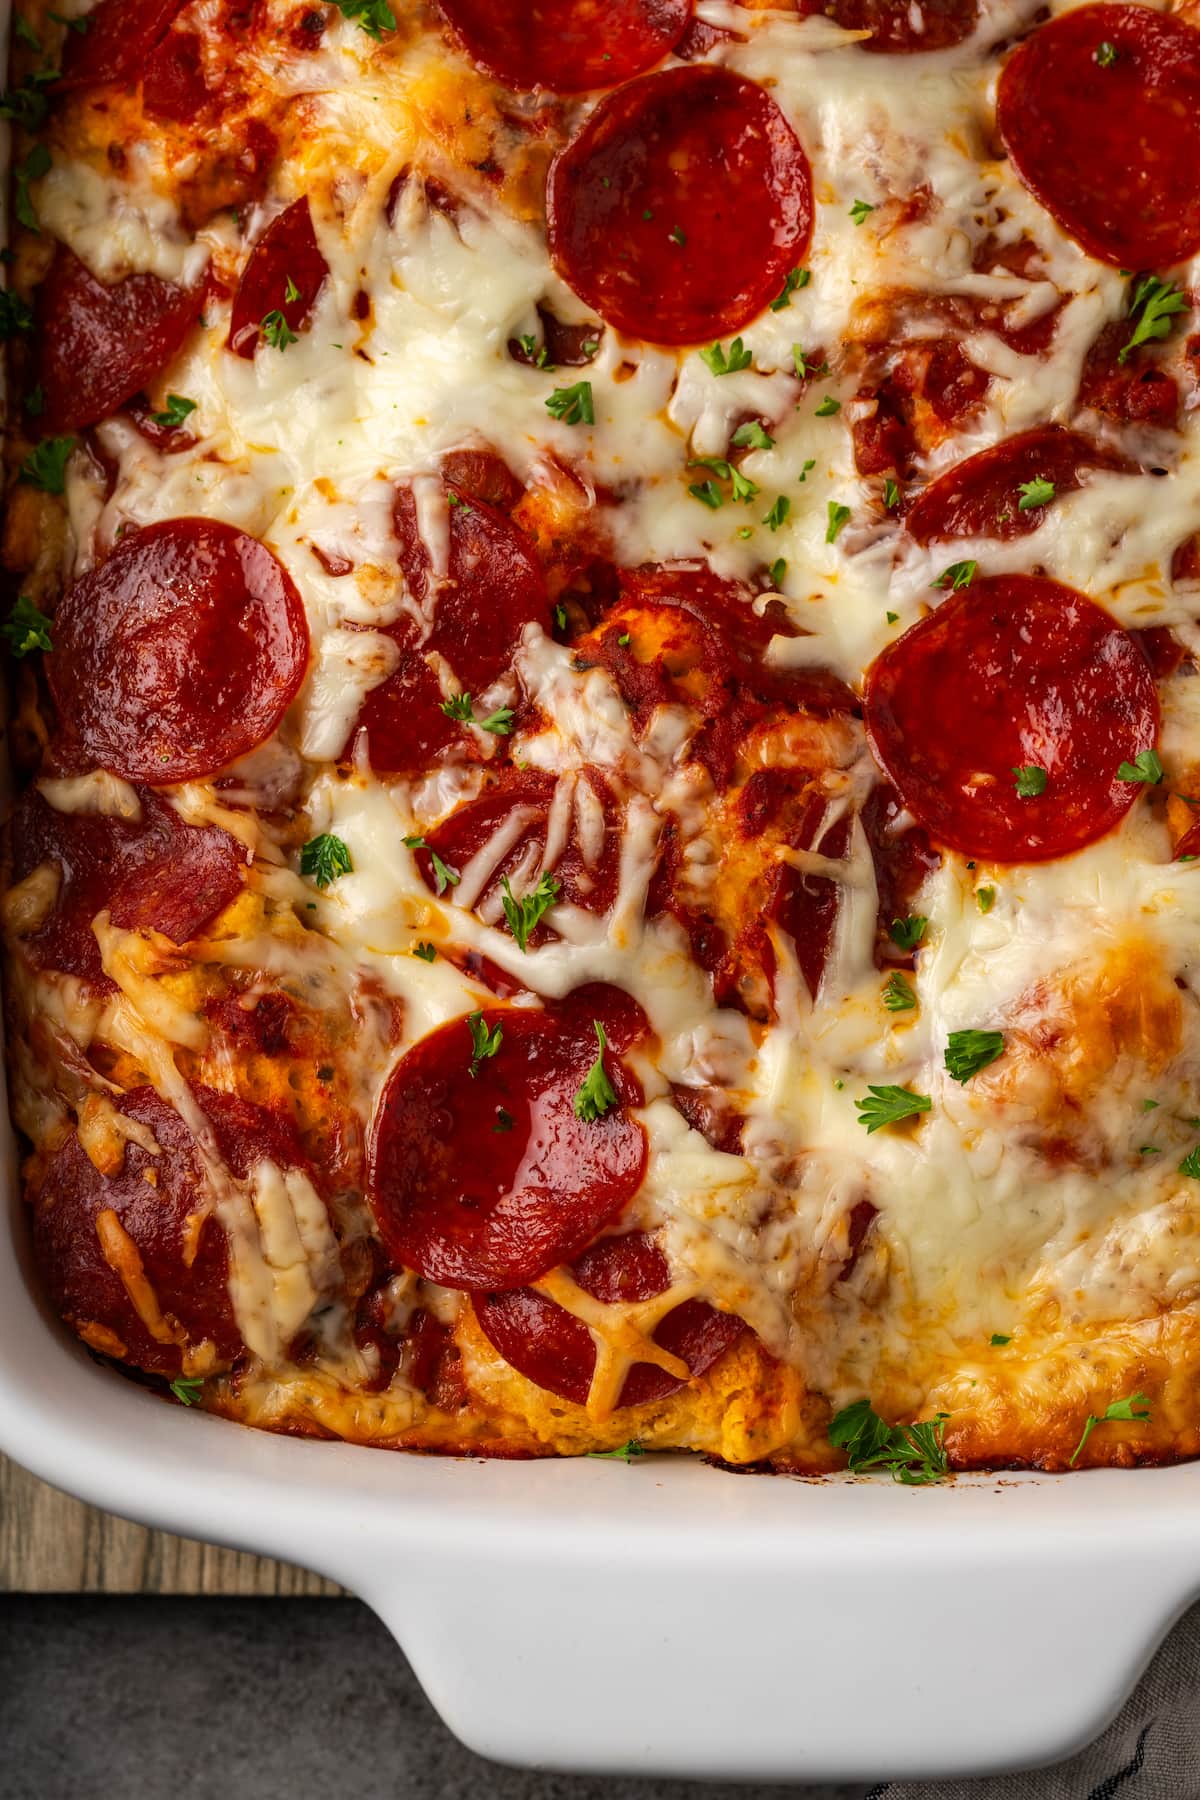 Overhead view of pizza casserole in a baking dish.